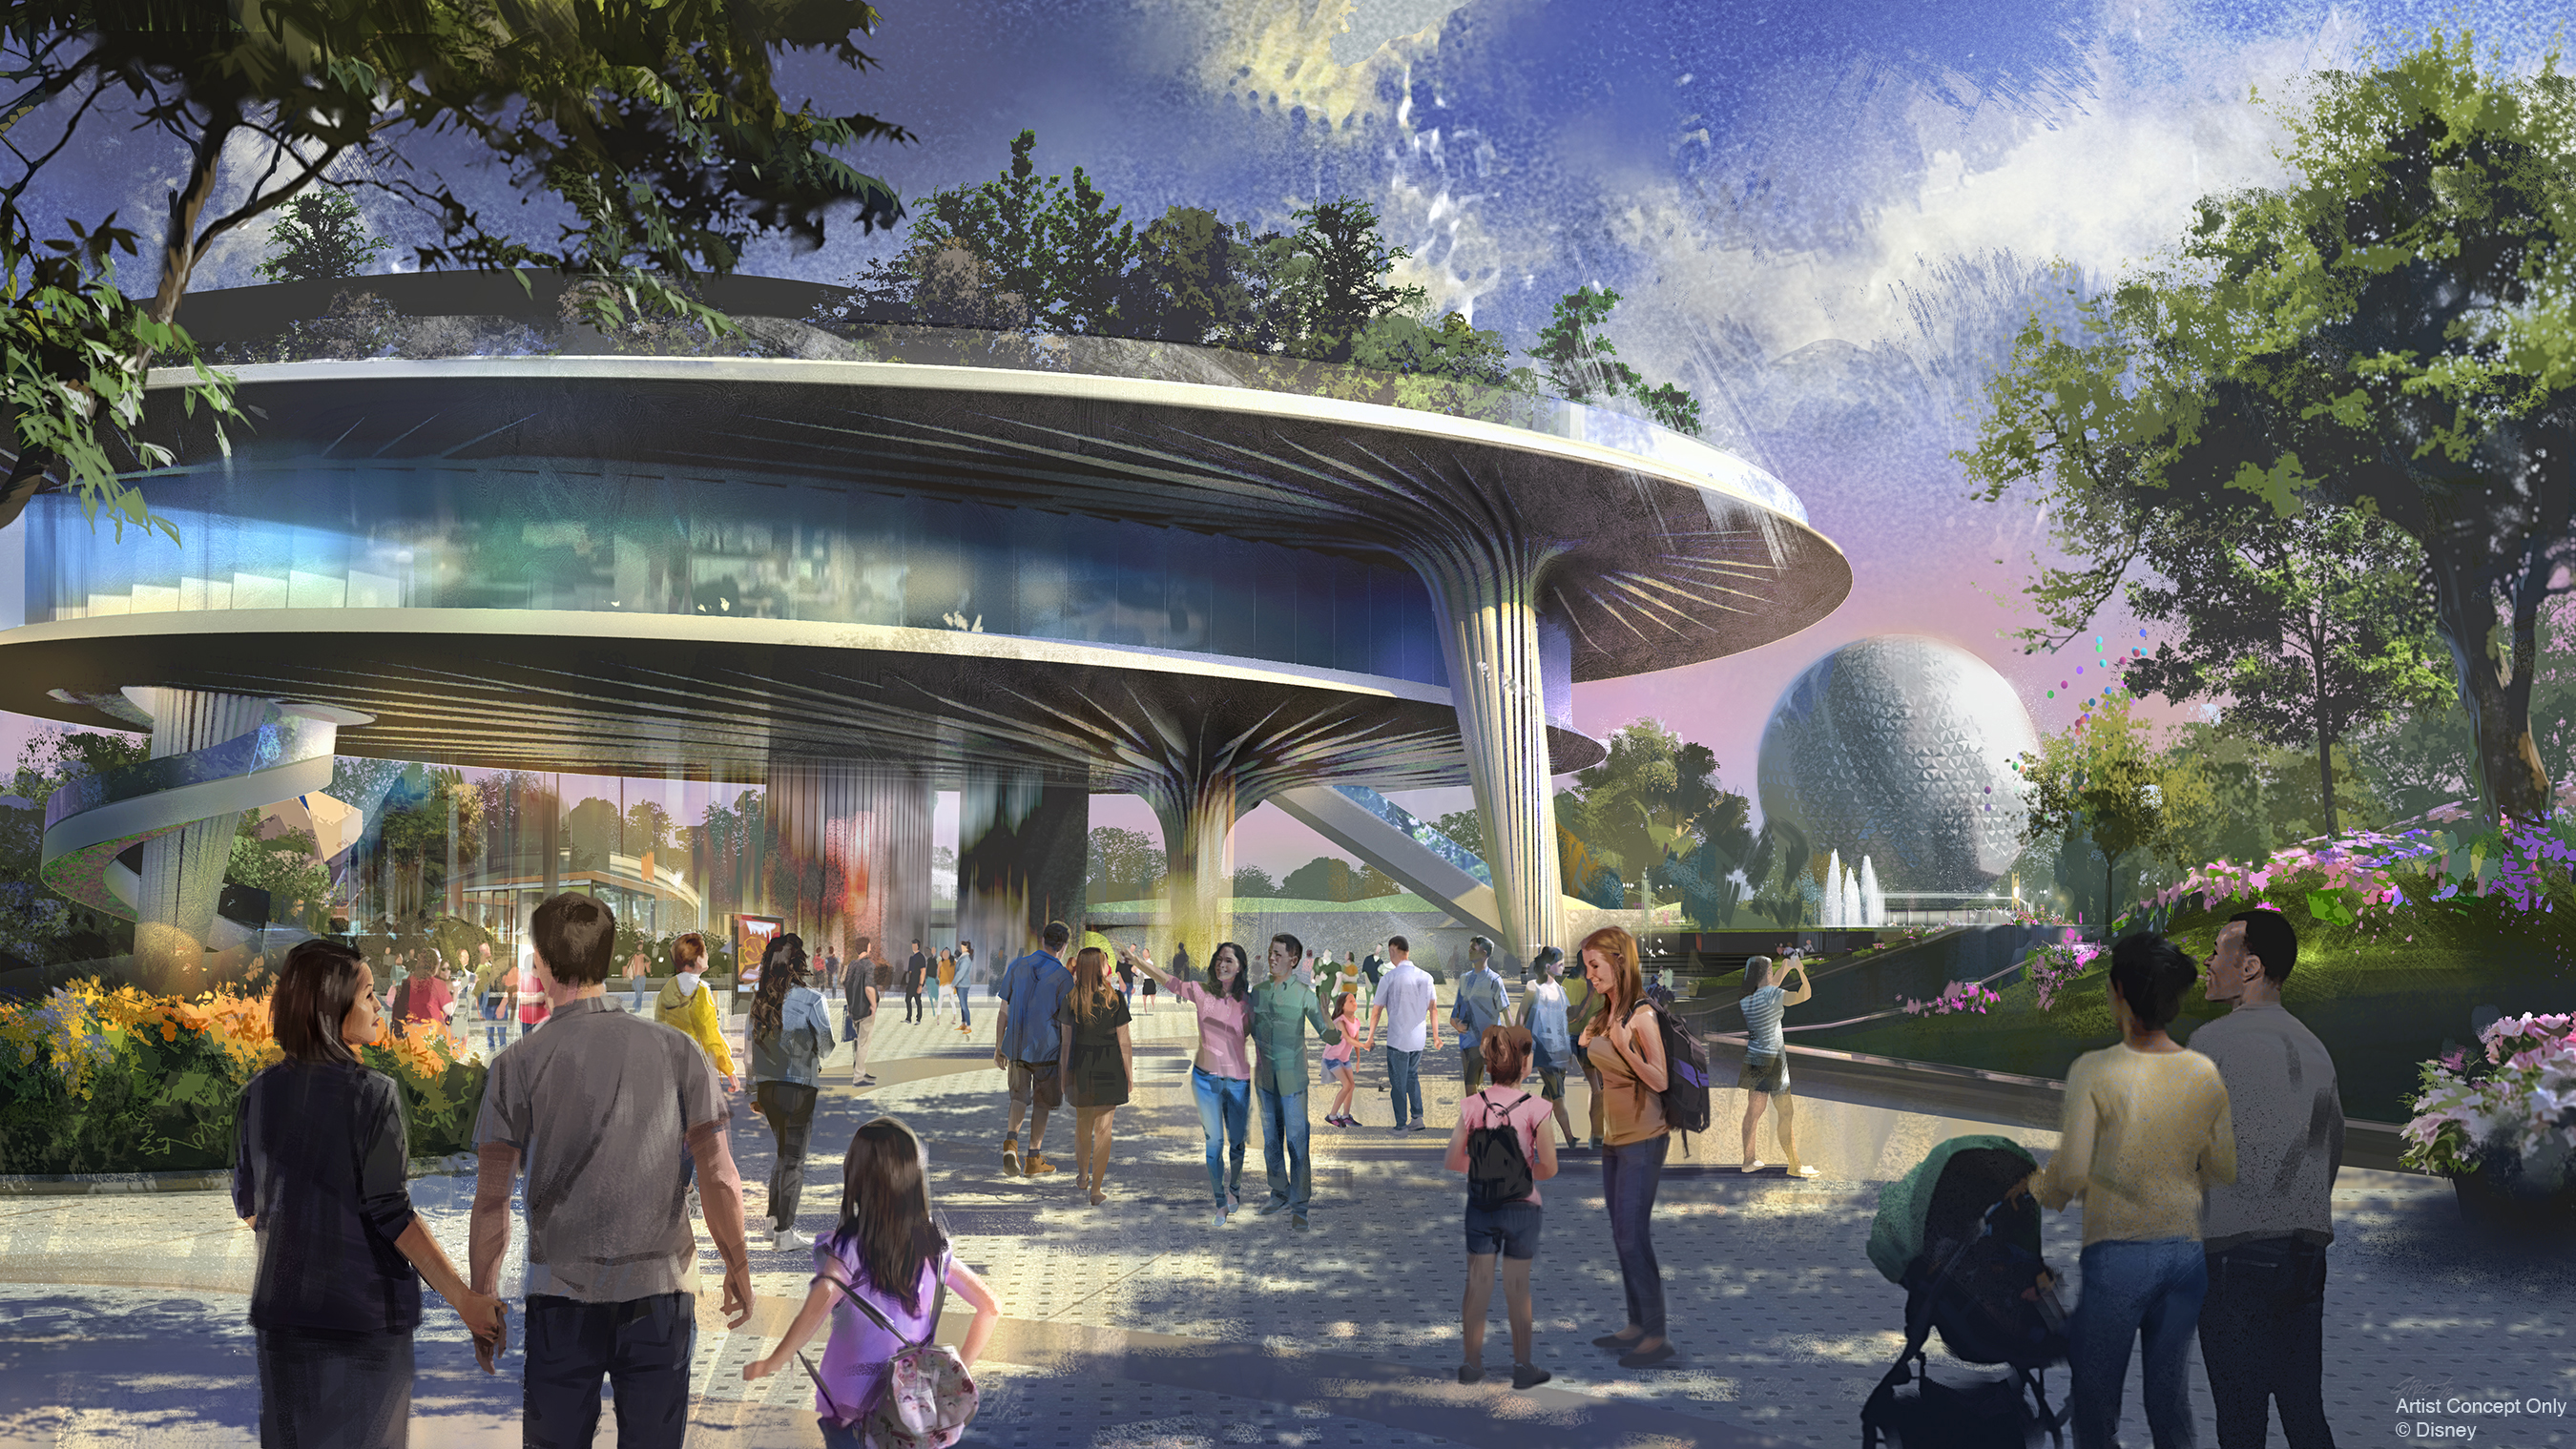 PHOTOS New concept art shows more of Epcot's redesign including new